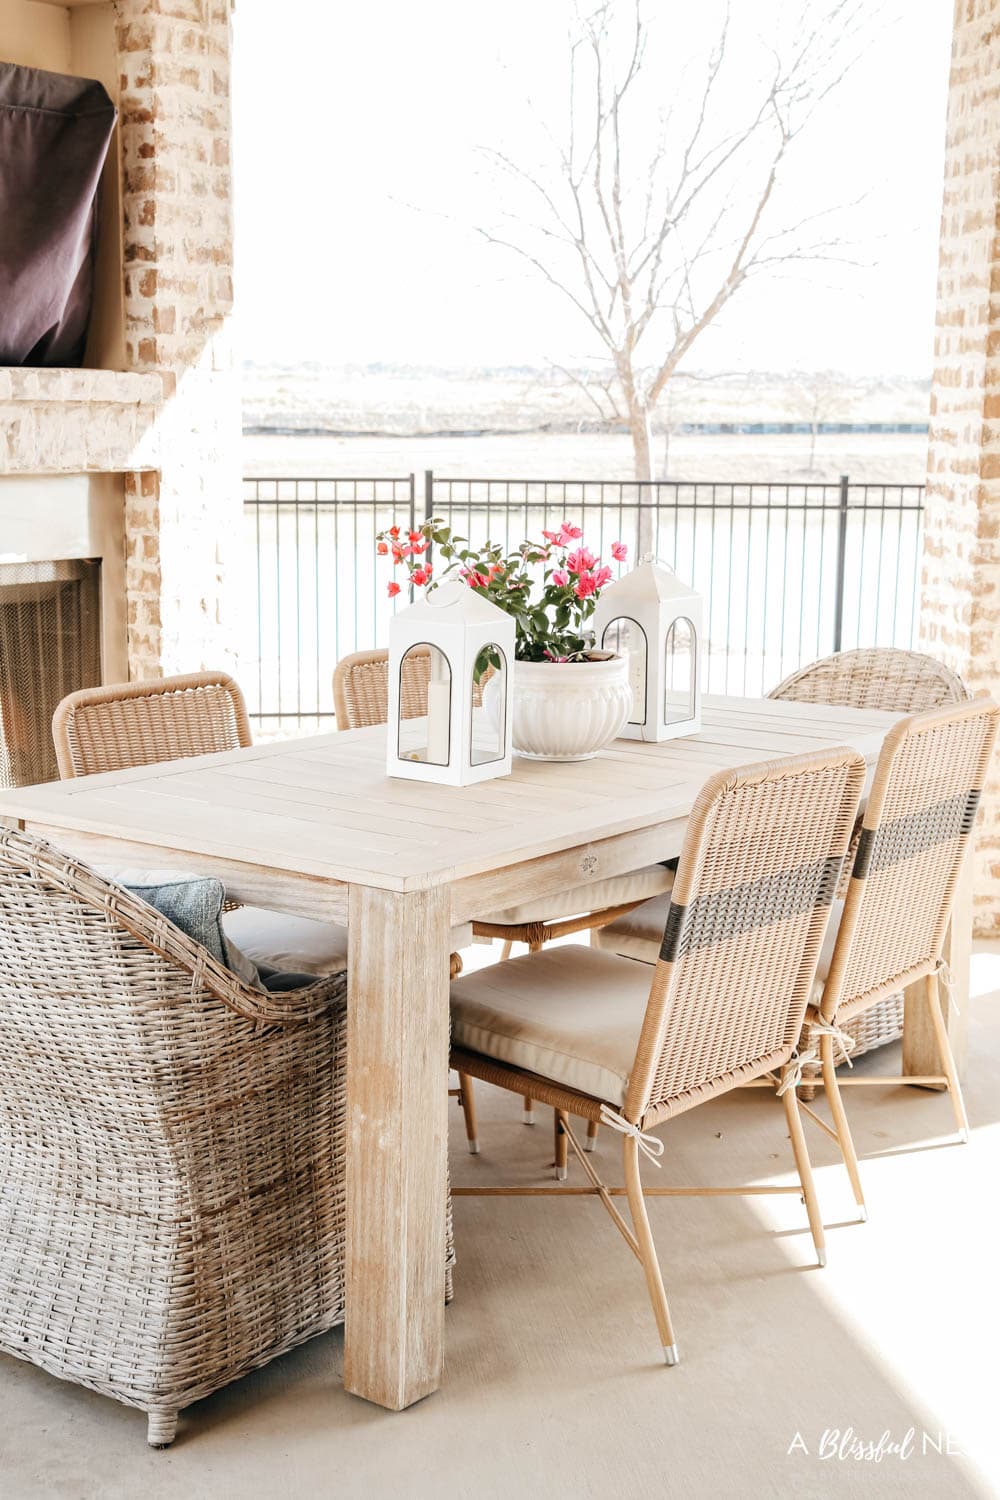 Outdoor table with weave chairs and white lanterns with a pink bougainvillea plant